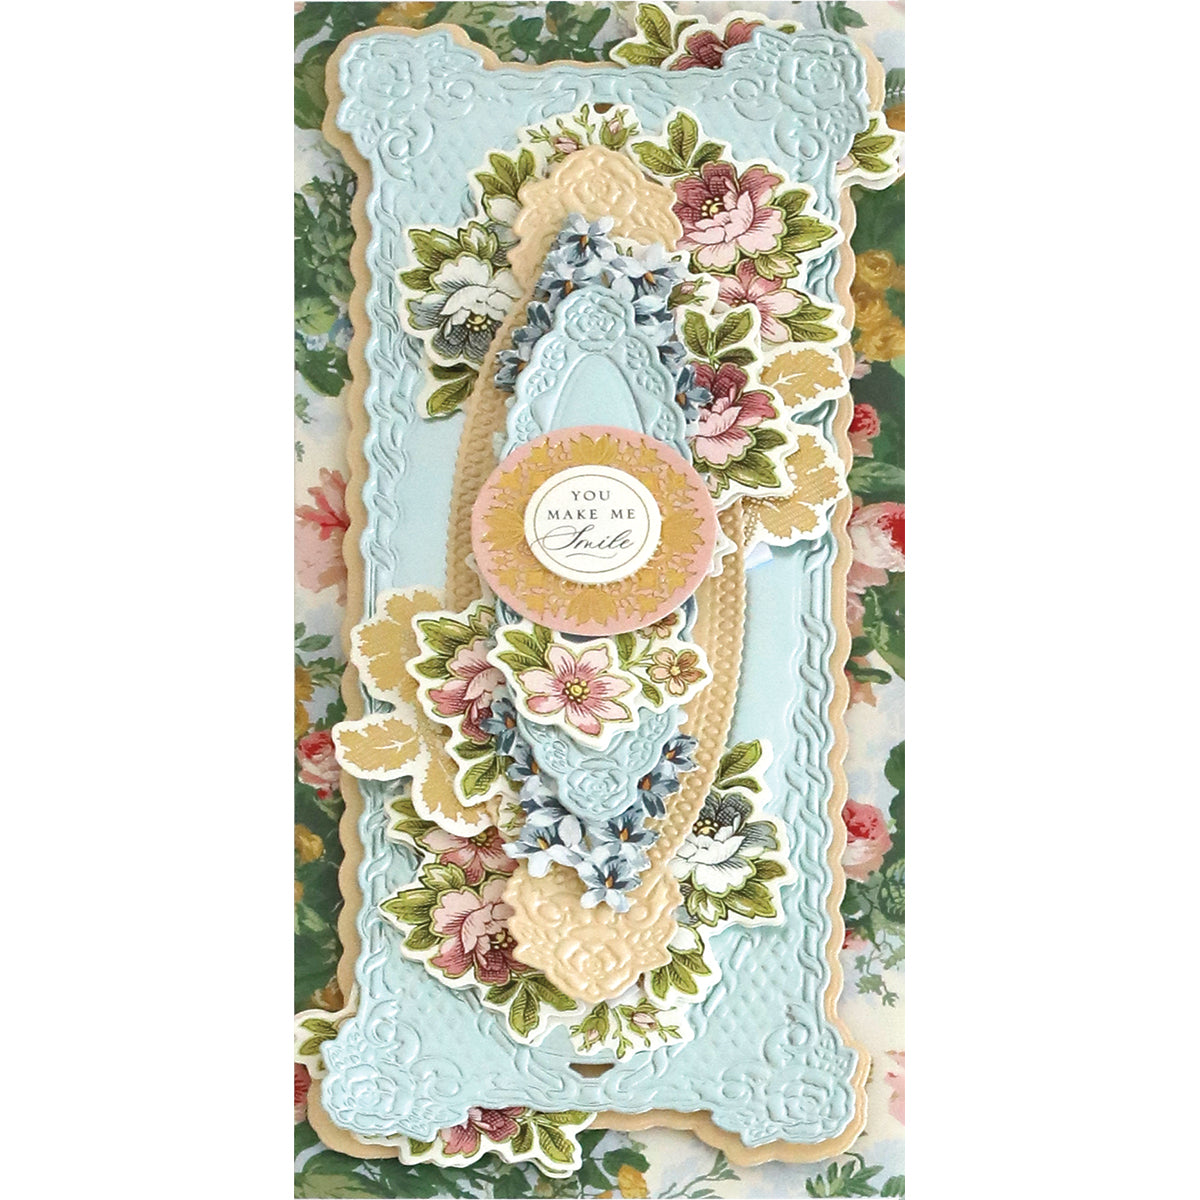 A card featuring a beautiful floral design made using Anna Griffin's 3D Rose Slimline Concentric Frame Dies, perfect for card making enthusiasts.